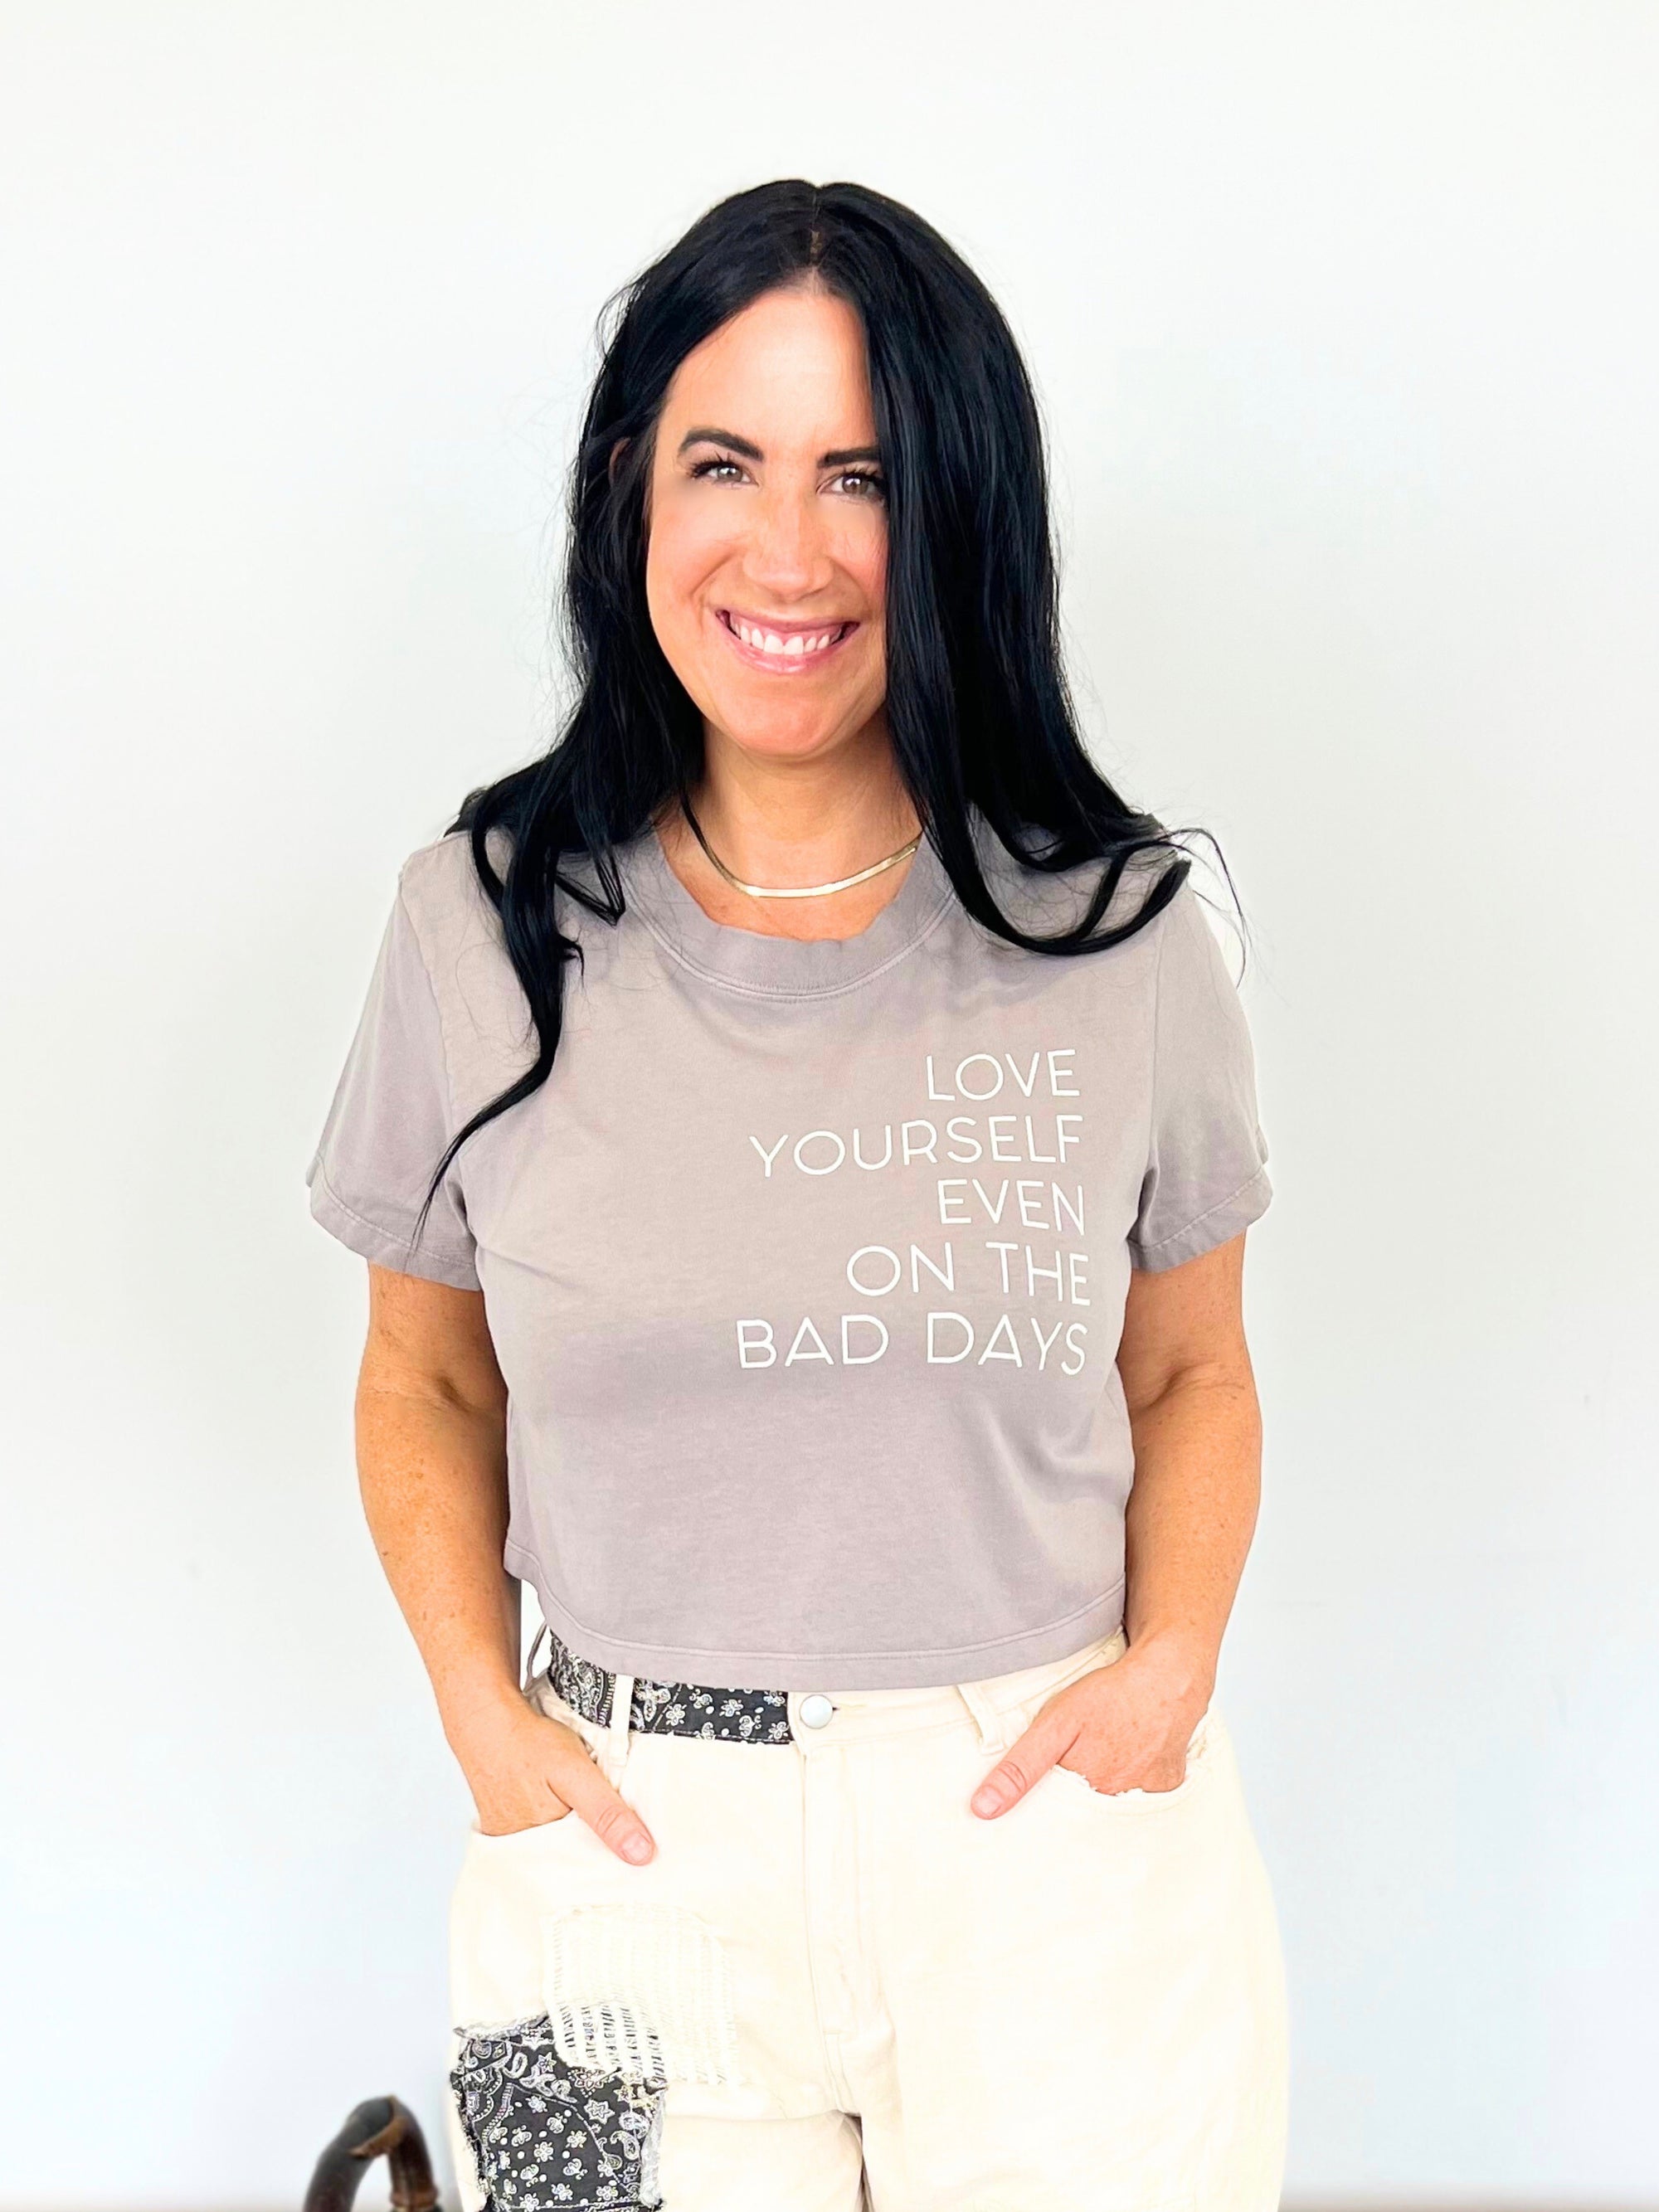 The "Love Yourself Even" Graphic Tee